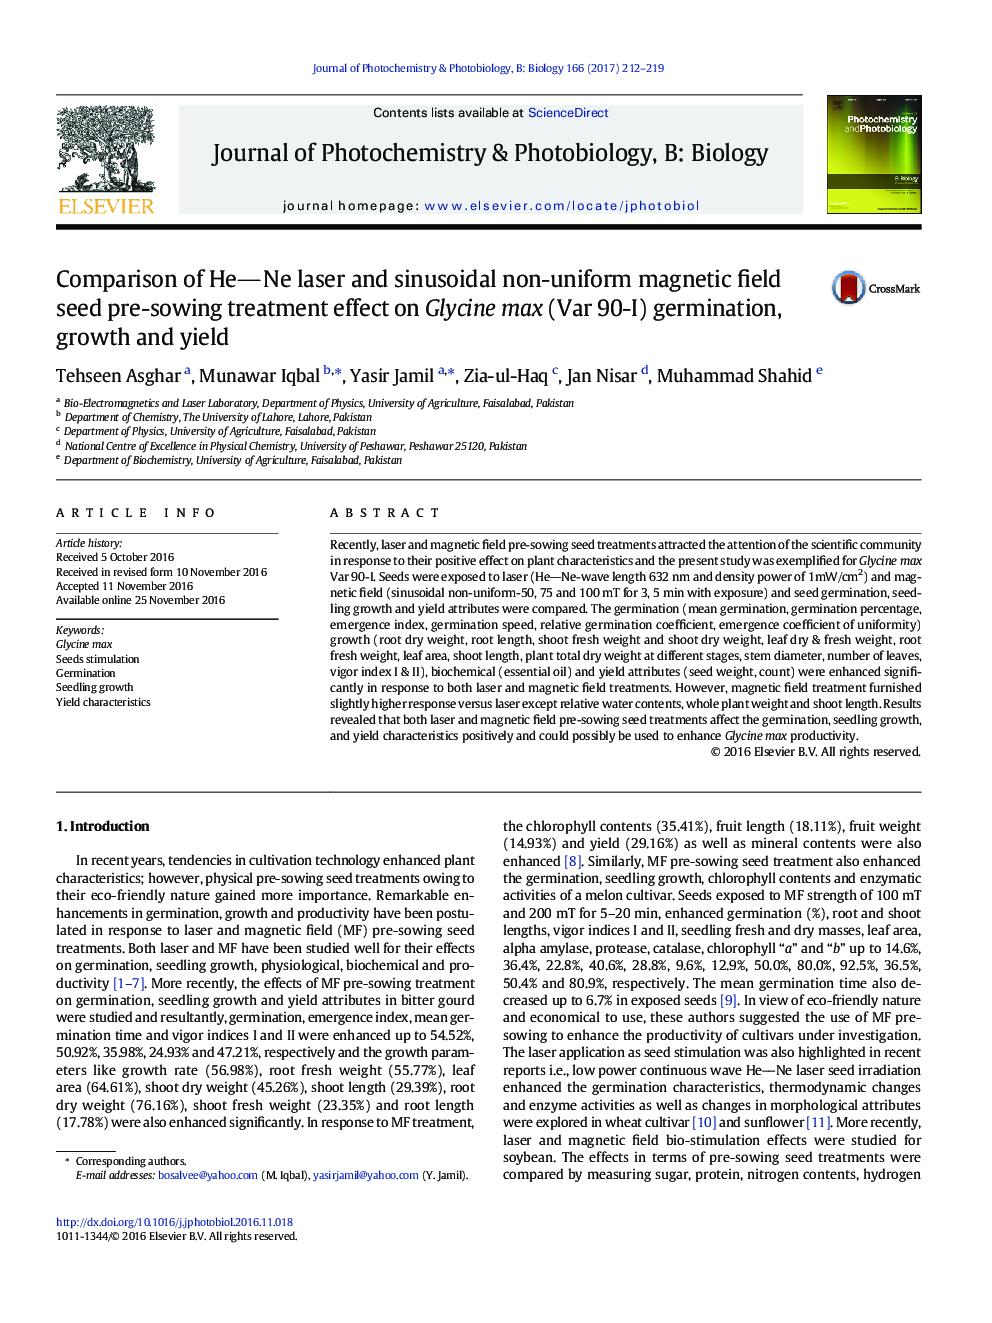 Comparison of HeNe laser and sinusoidal non-uniform magnetic field seed pre-sowing treatment effect on Glycine max (Var 90-I) germination, growth and yield